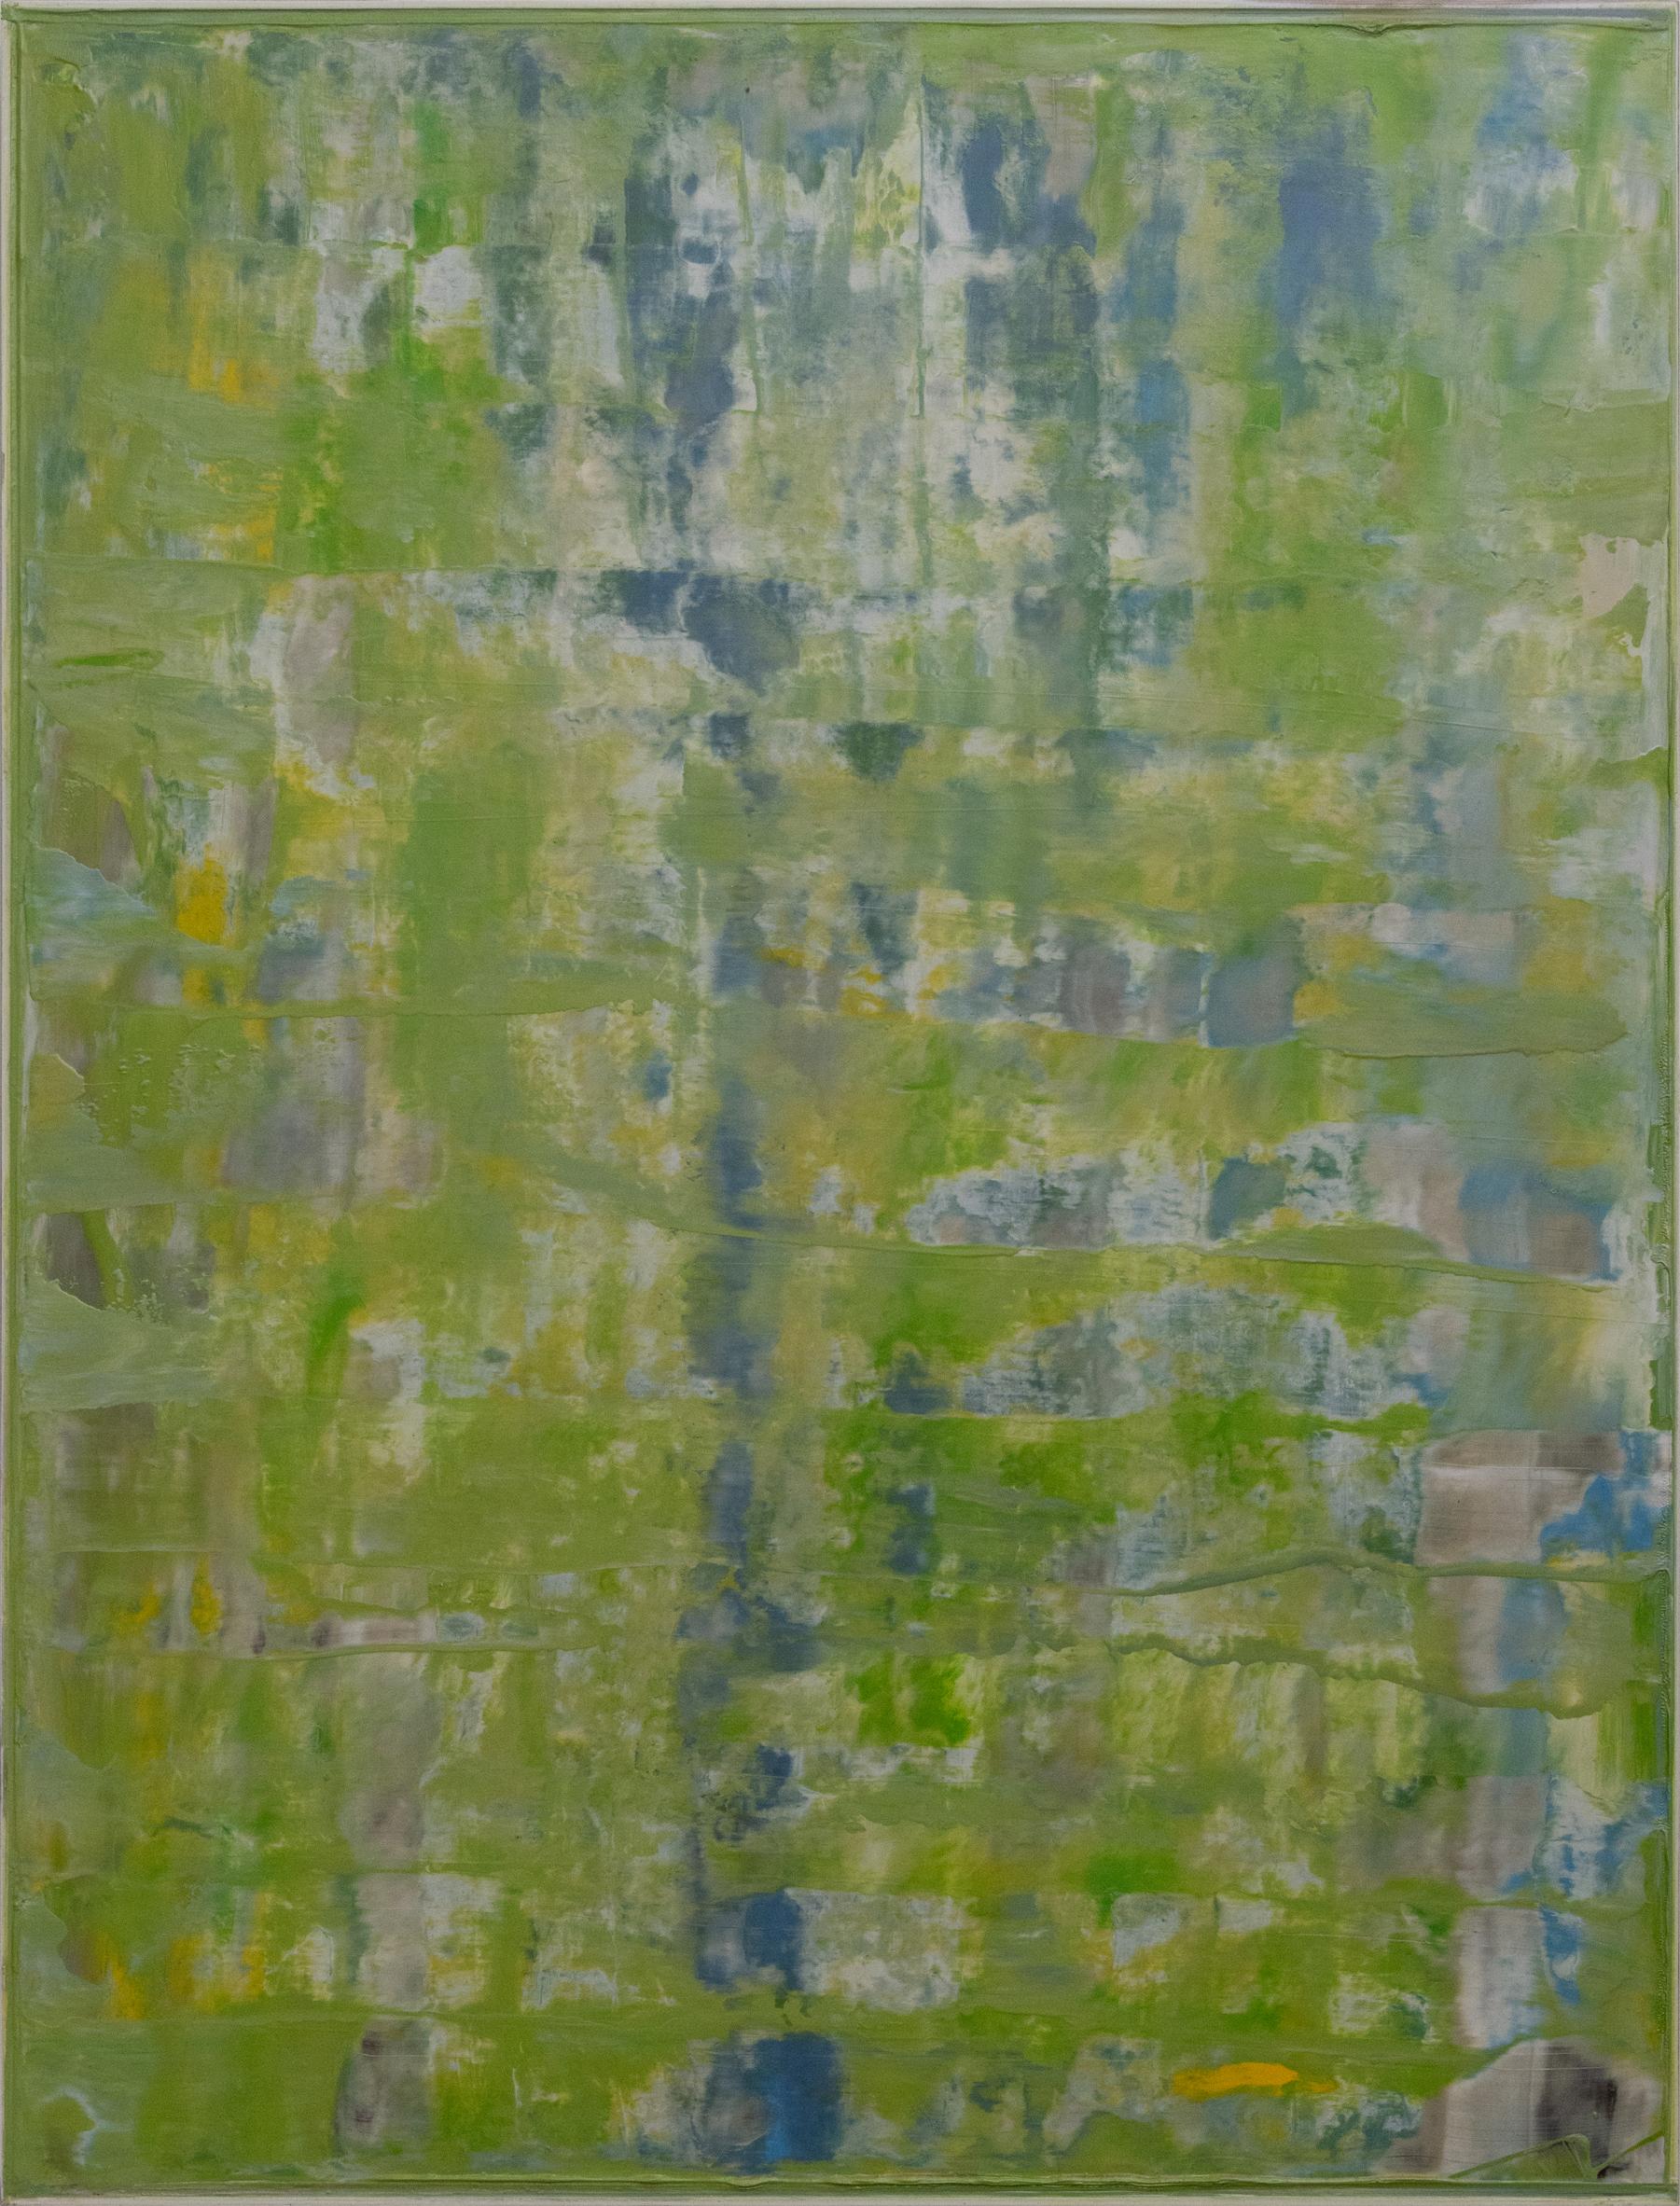 Arise - Blue, Green, Contemporary, Abstract, 21st Century, Painting